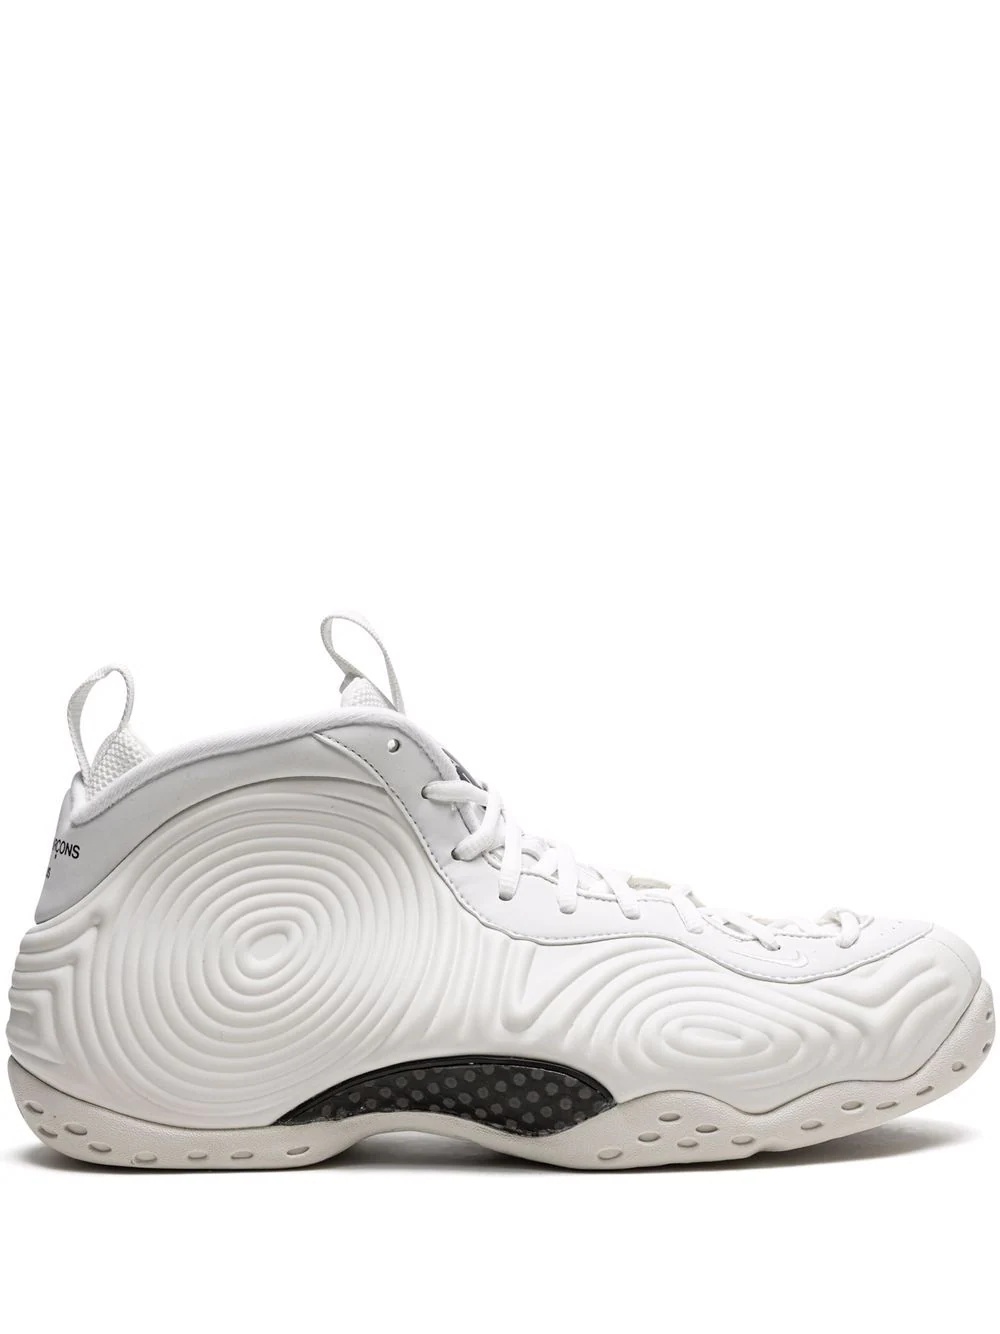 x Comme Des Garcons Air Foamposite One "White" sneakers - 1